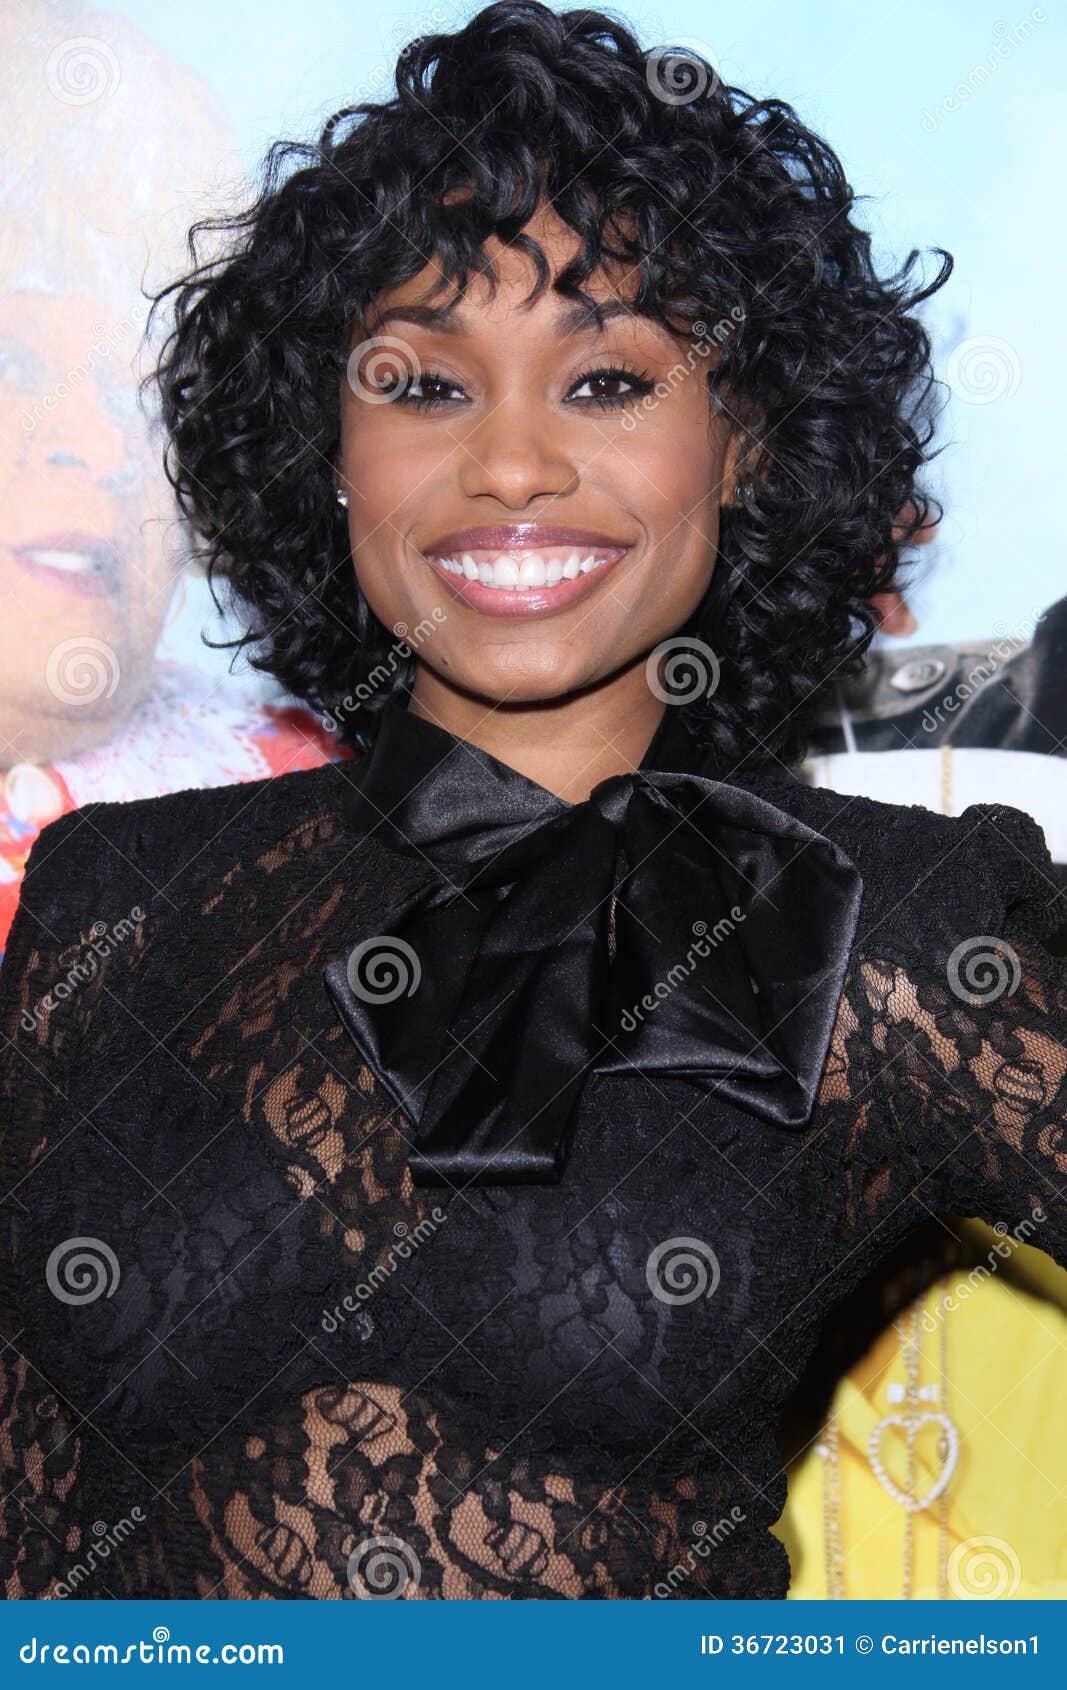 Pictures of angell conwell